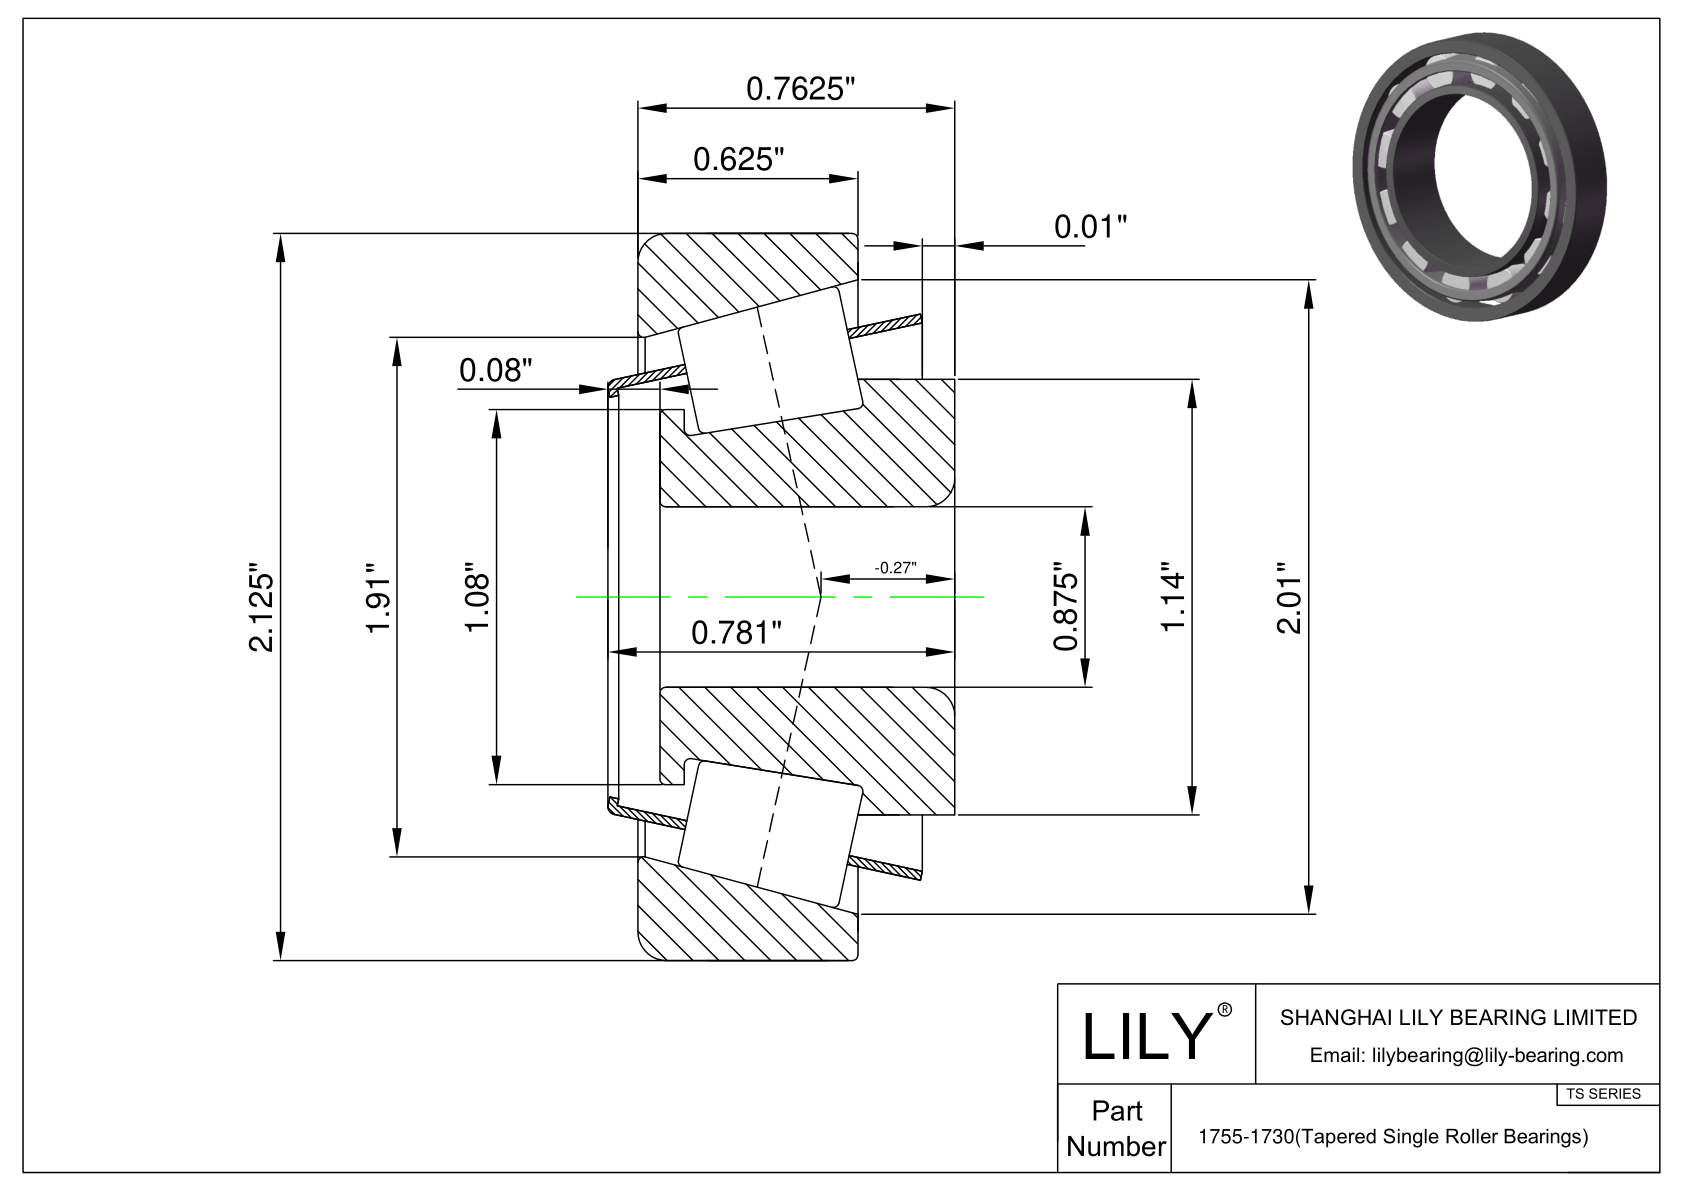 1755-1730 TS (Tapered Single Roller Bearings) (Imperial) cad drawing